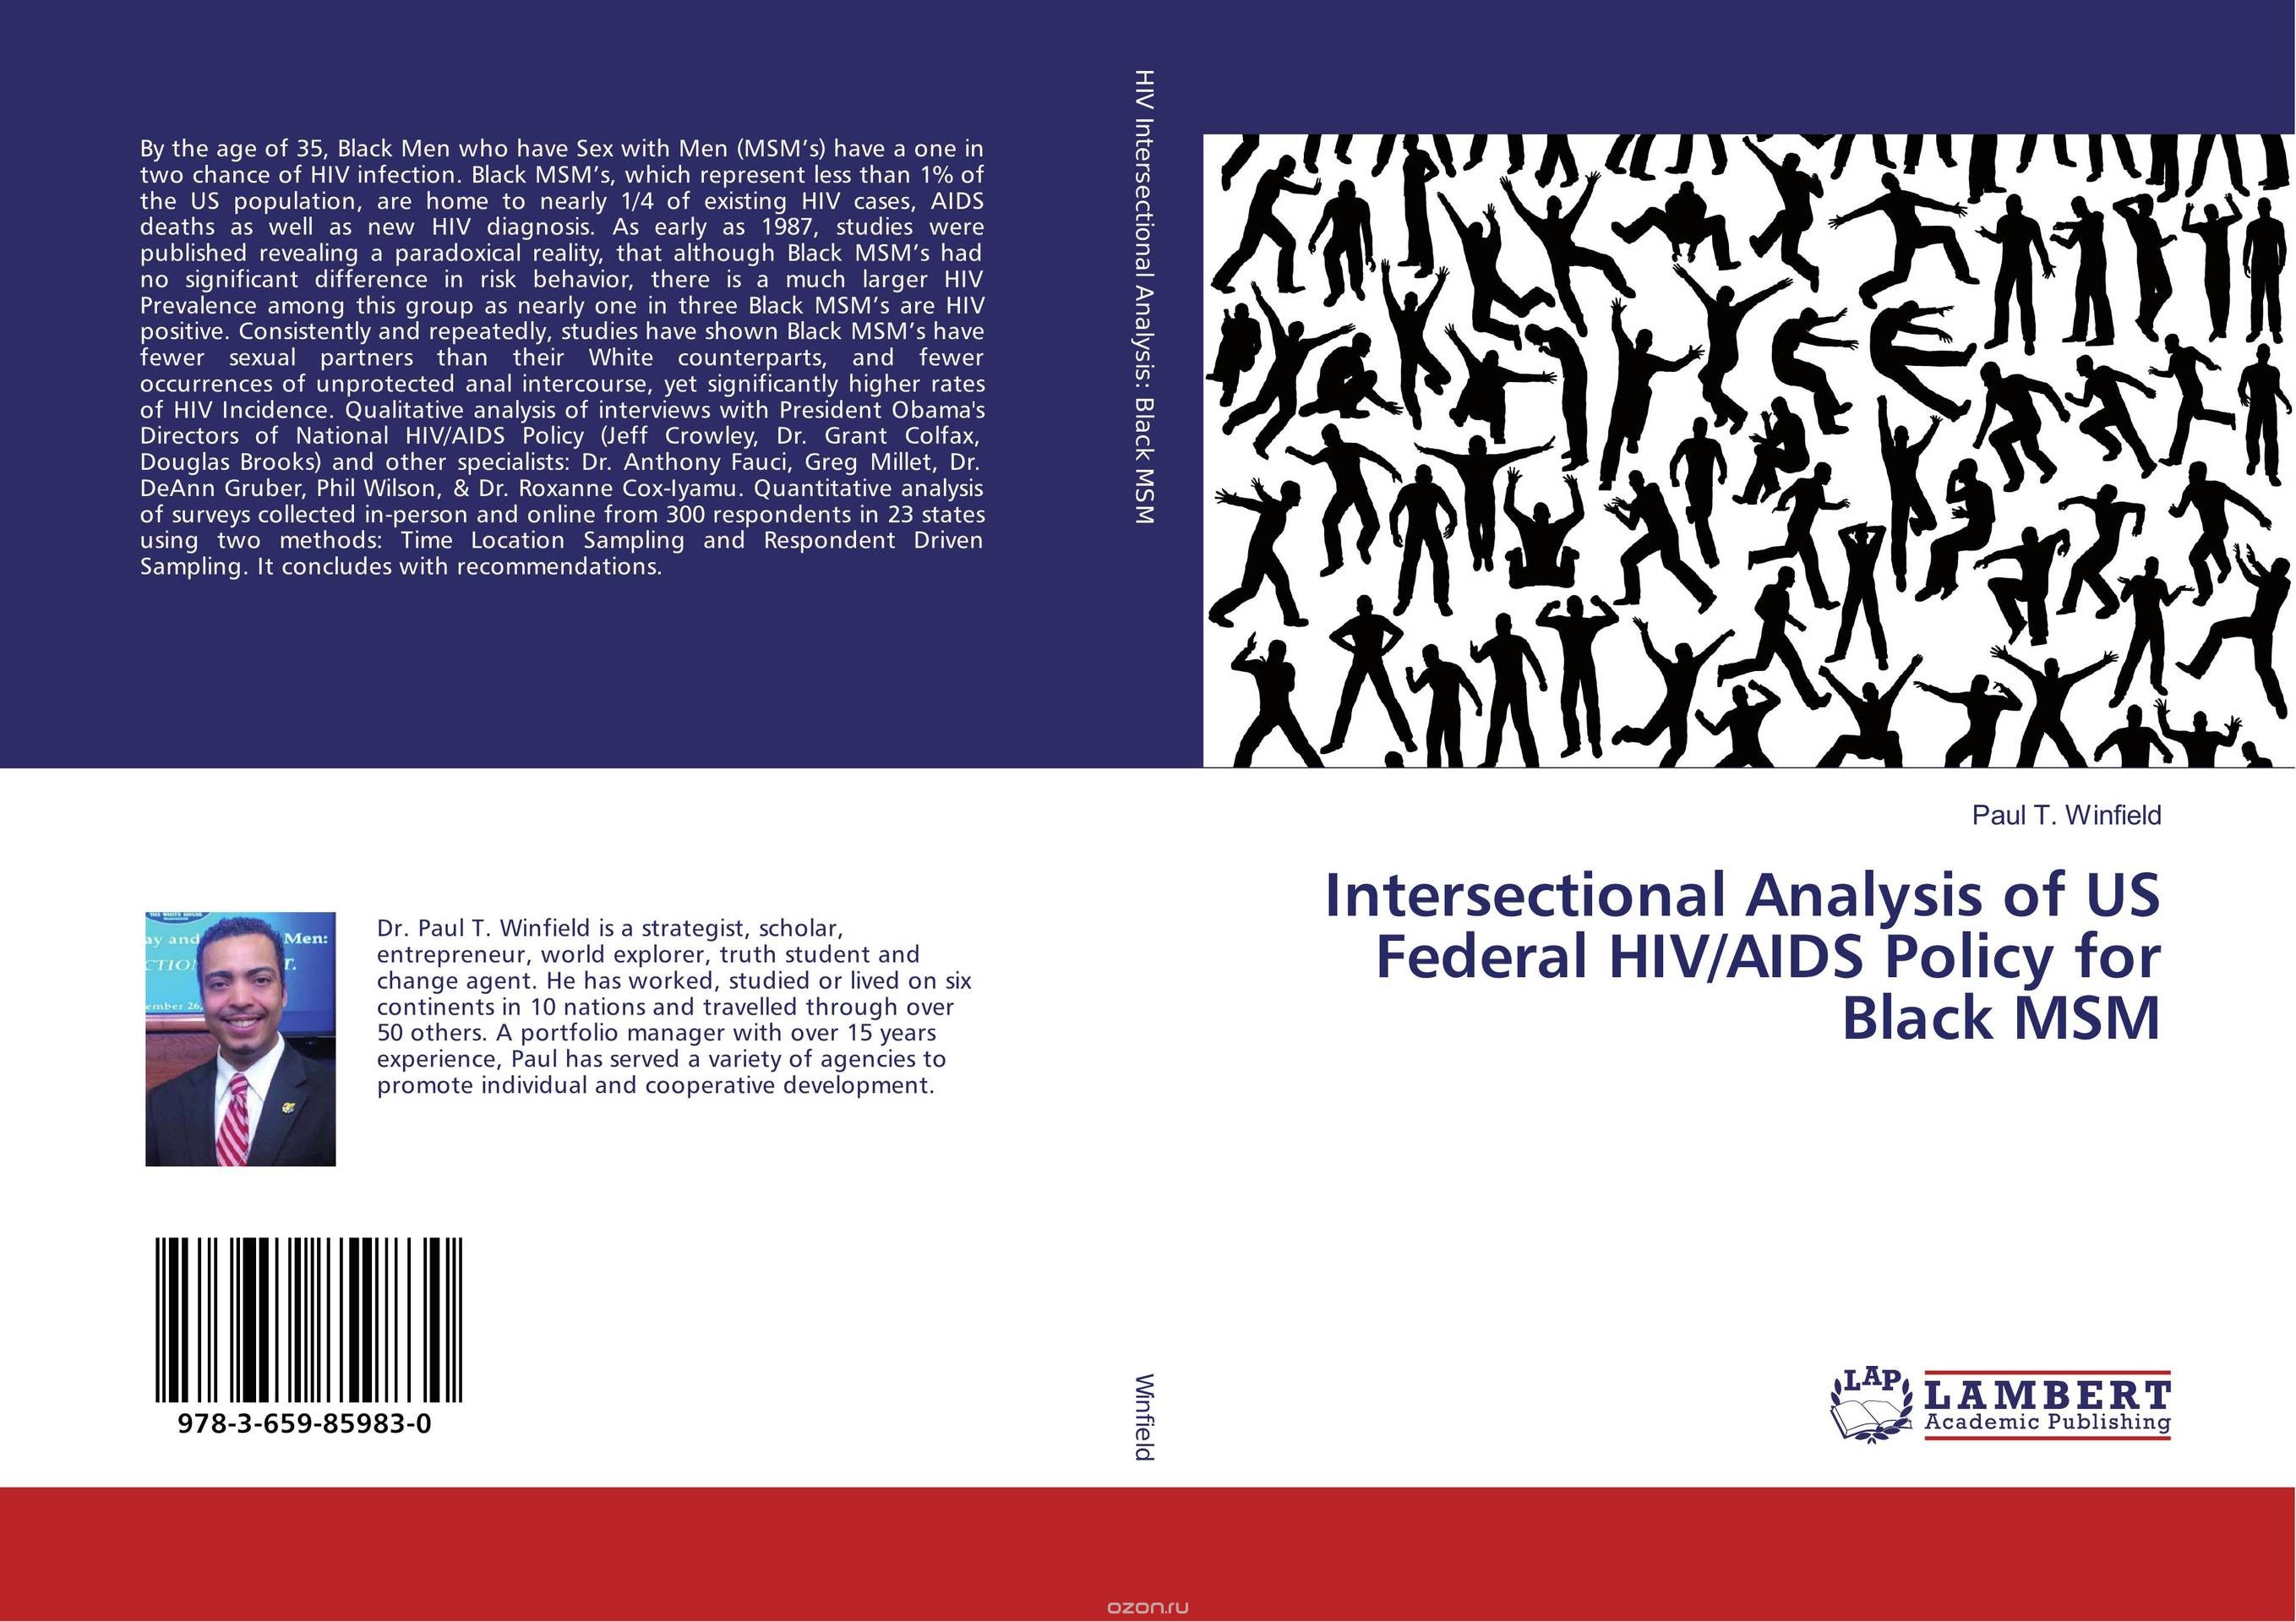 Intersectional Analysis of US Federal HIV/AIDS Policy for Black MSM